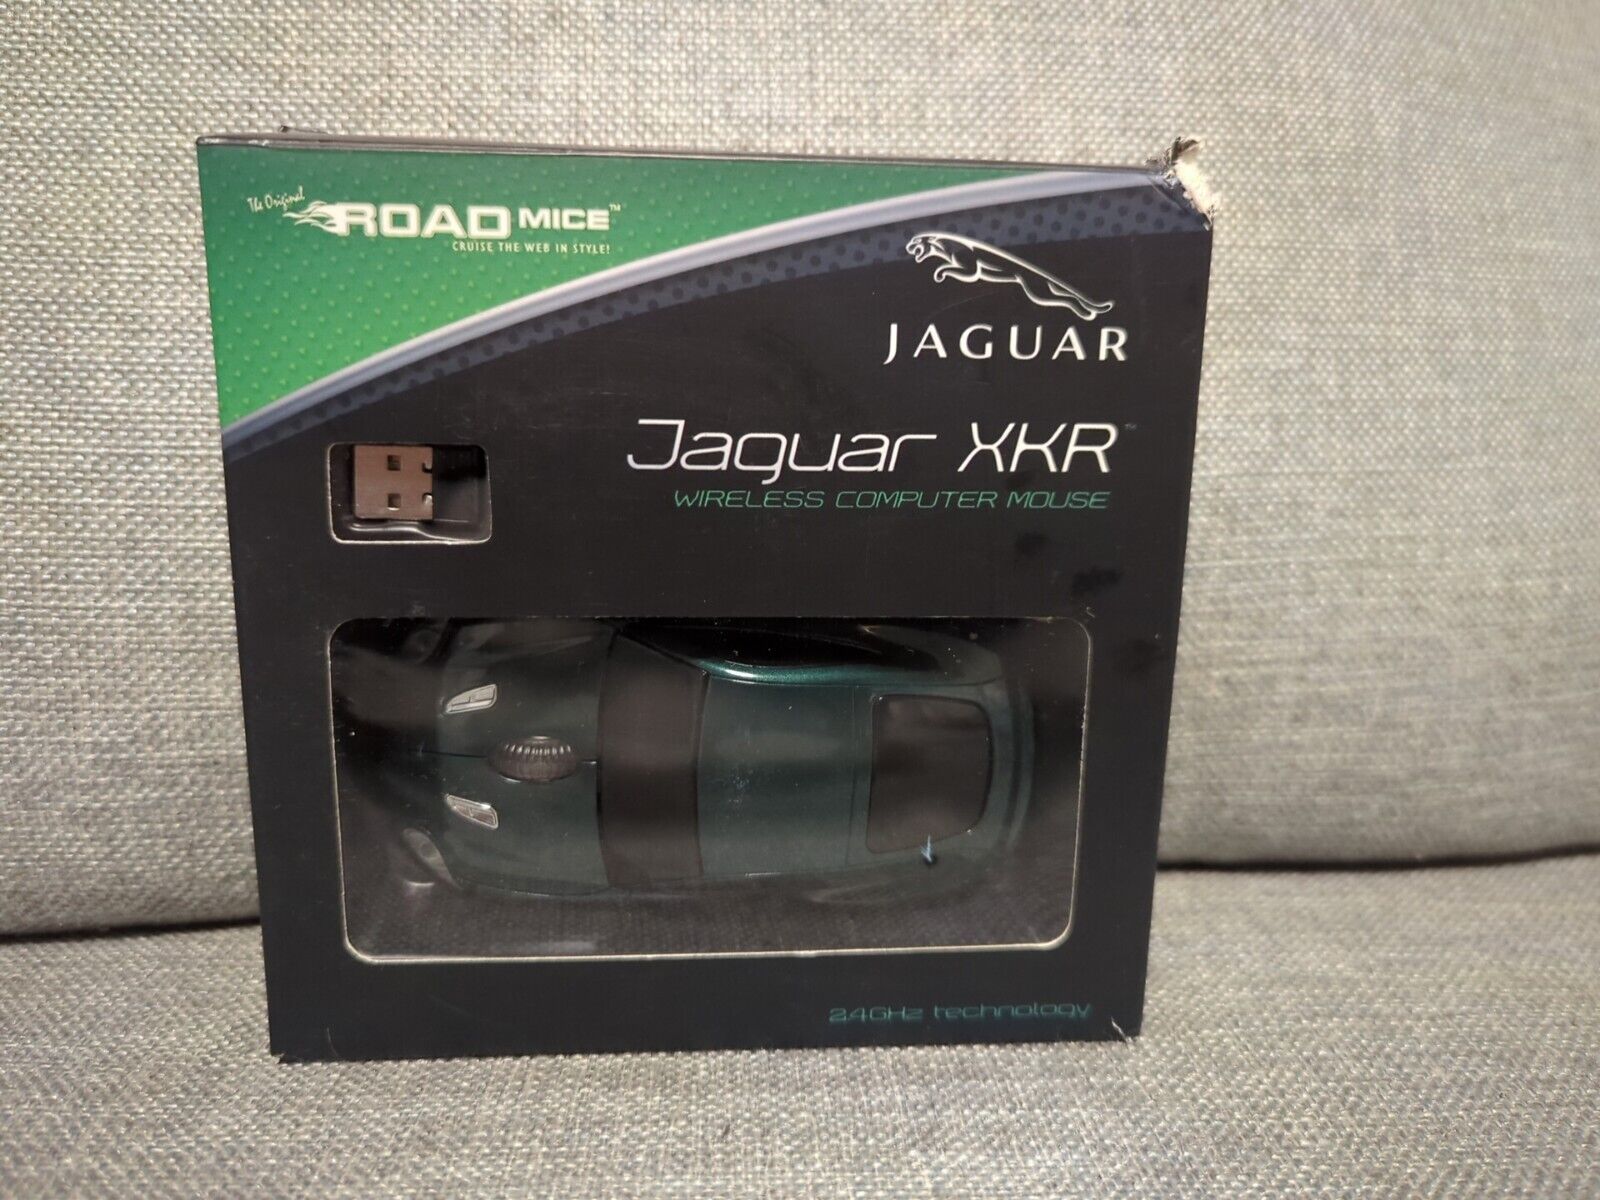 Original Road Mice Jaguar XLR Gift Wireless Computer Mouse with headlights